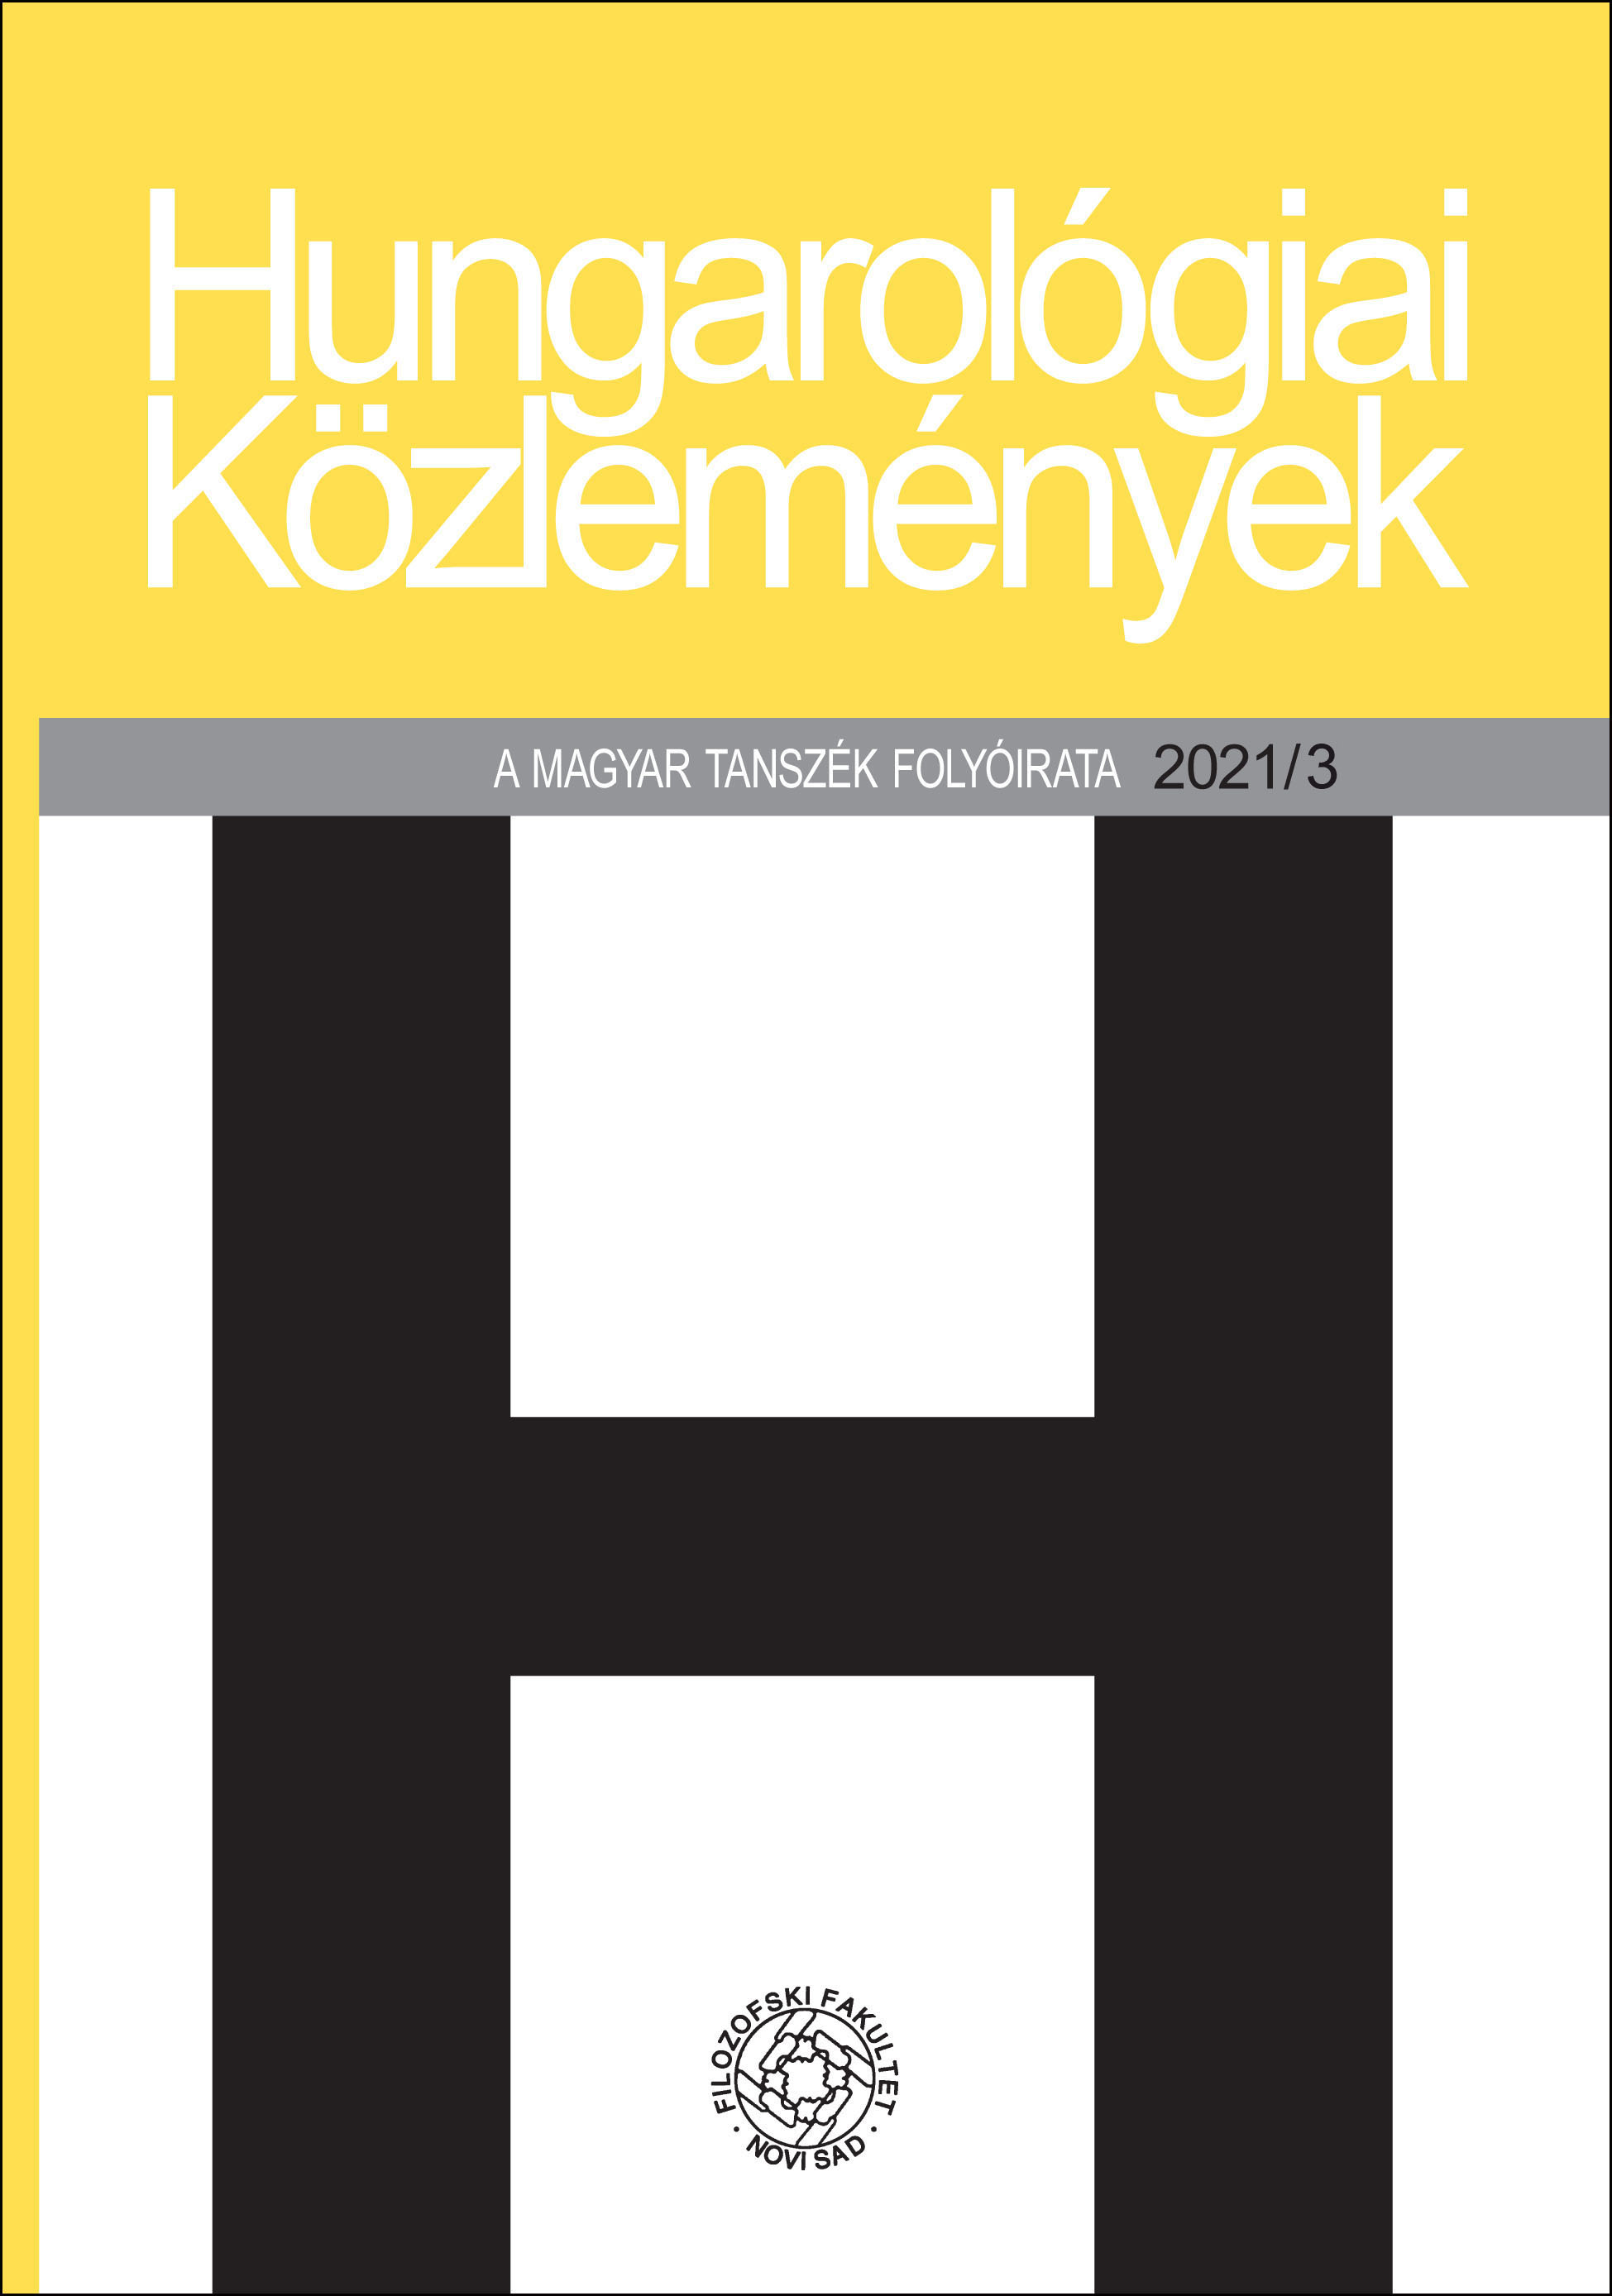 Applied linguistics and hungarian linguistic sciences in ethnic hungarian minorities’ higher education Cover Image